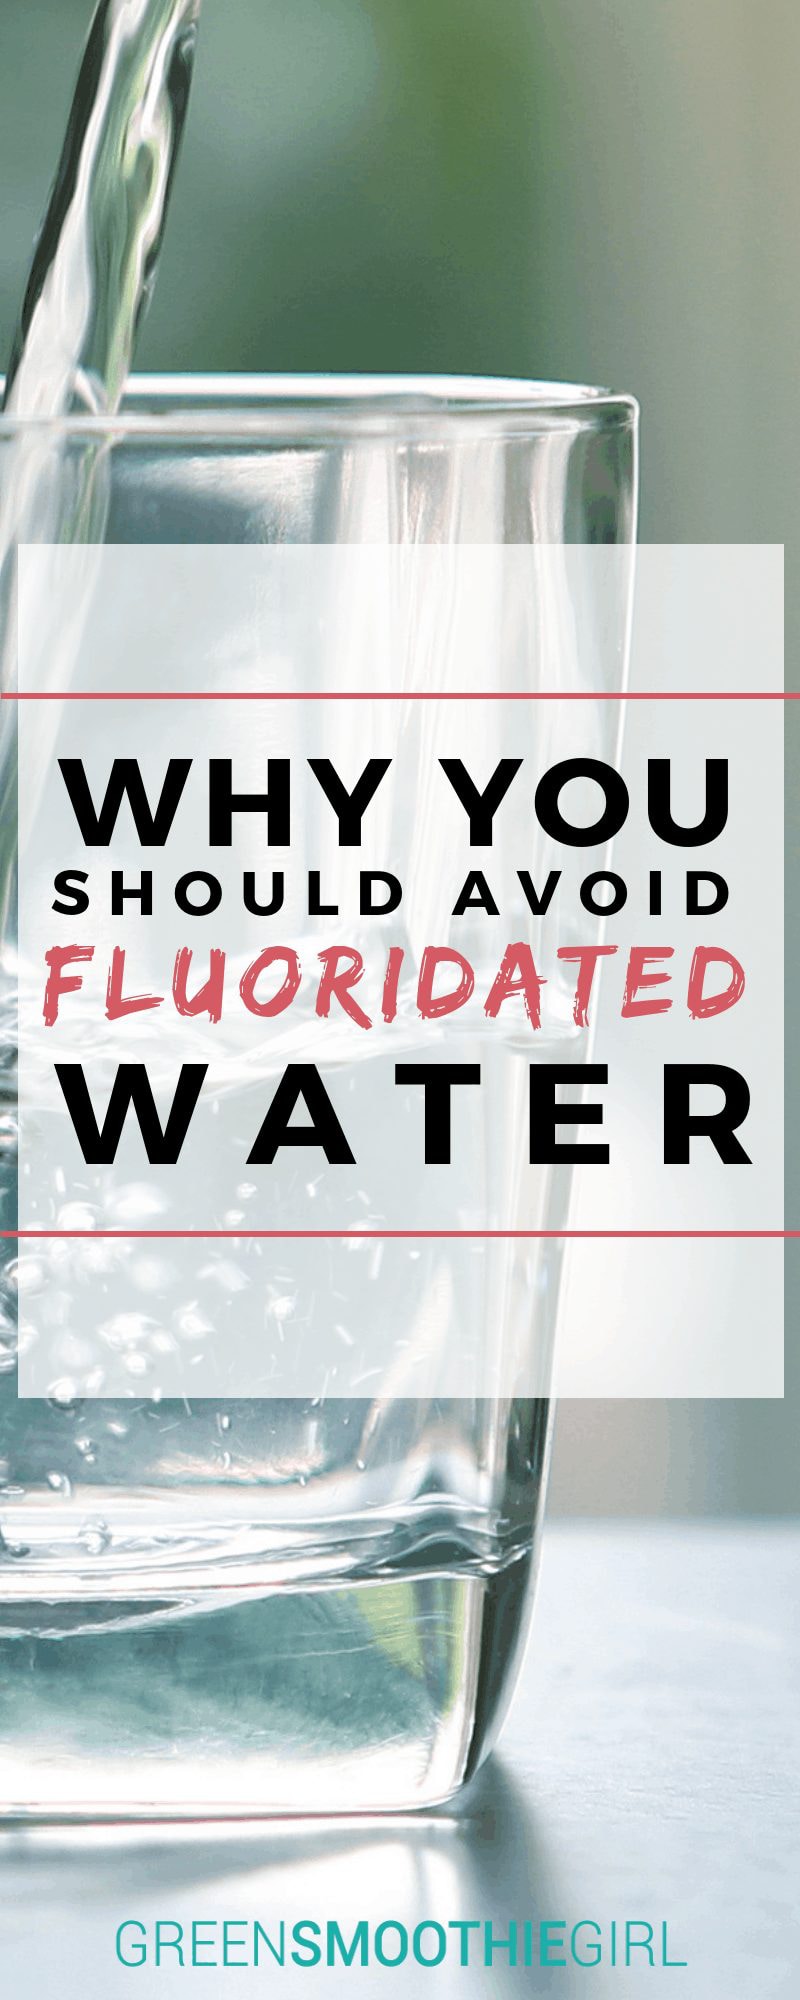 Why You Should Avoid Fluoridated Water | Green Smoothie Girl